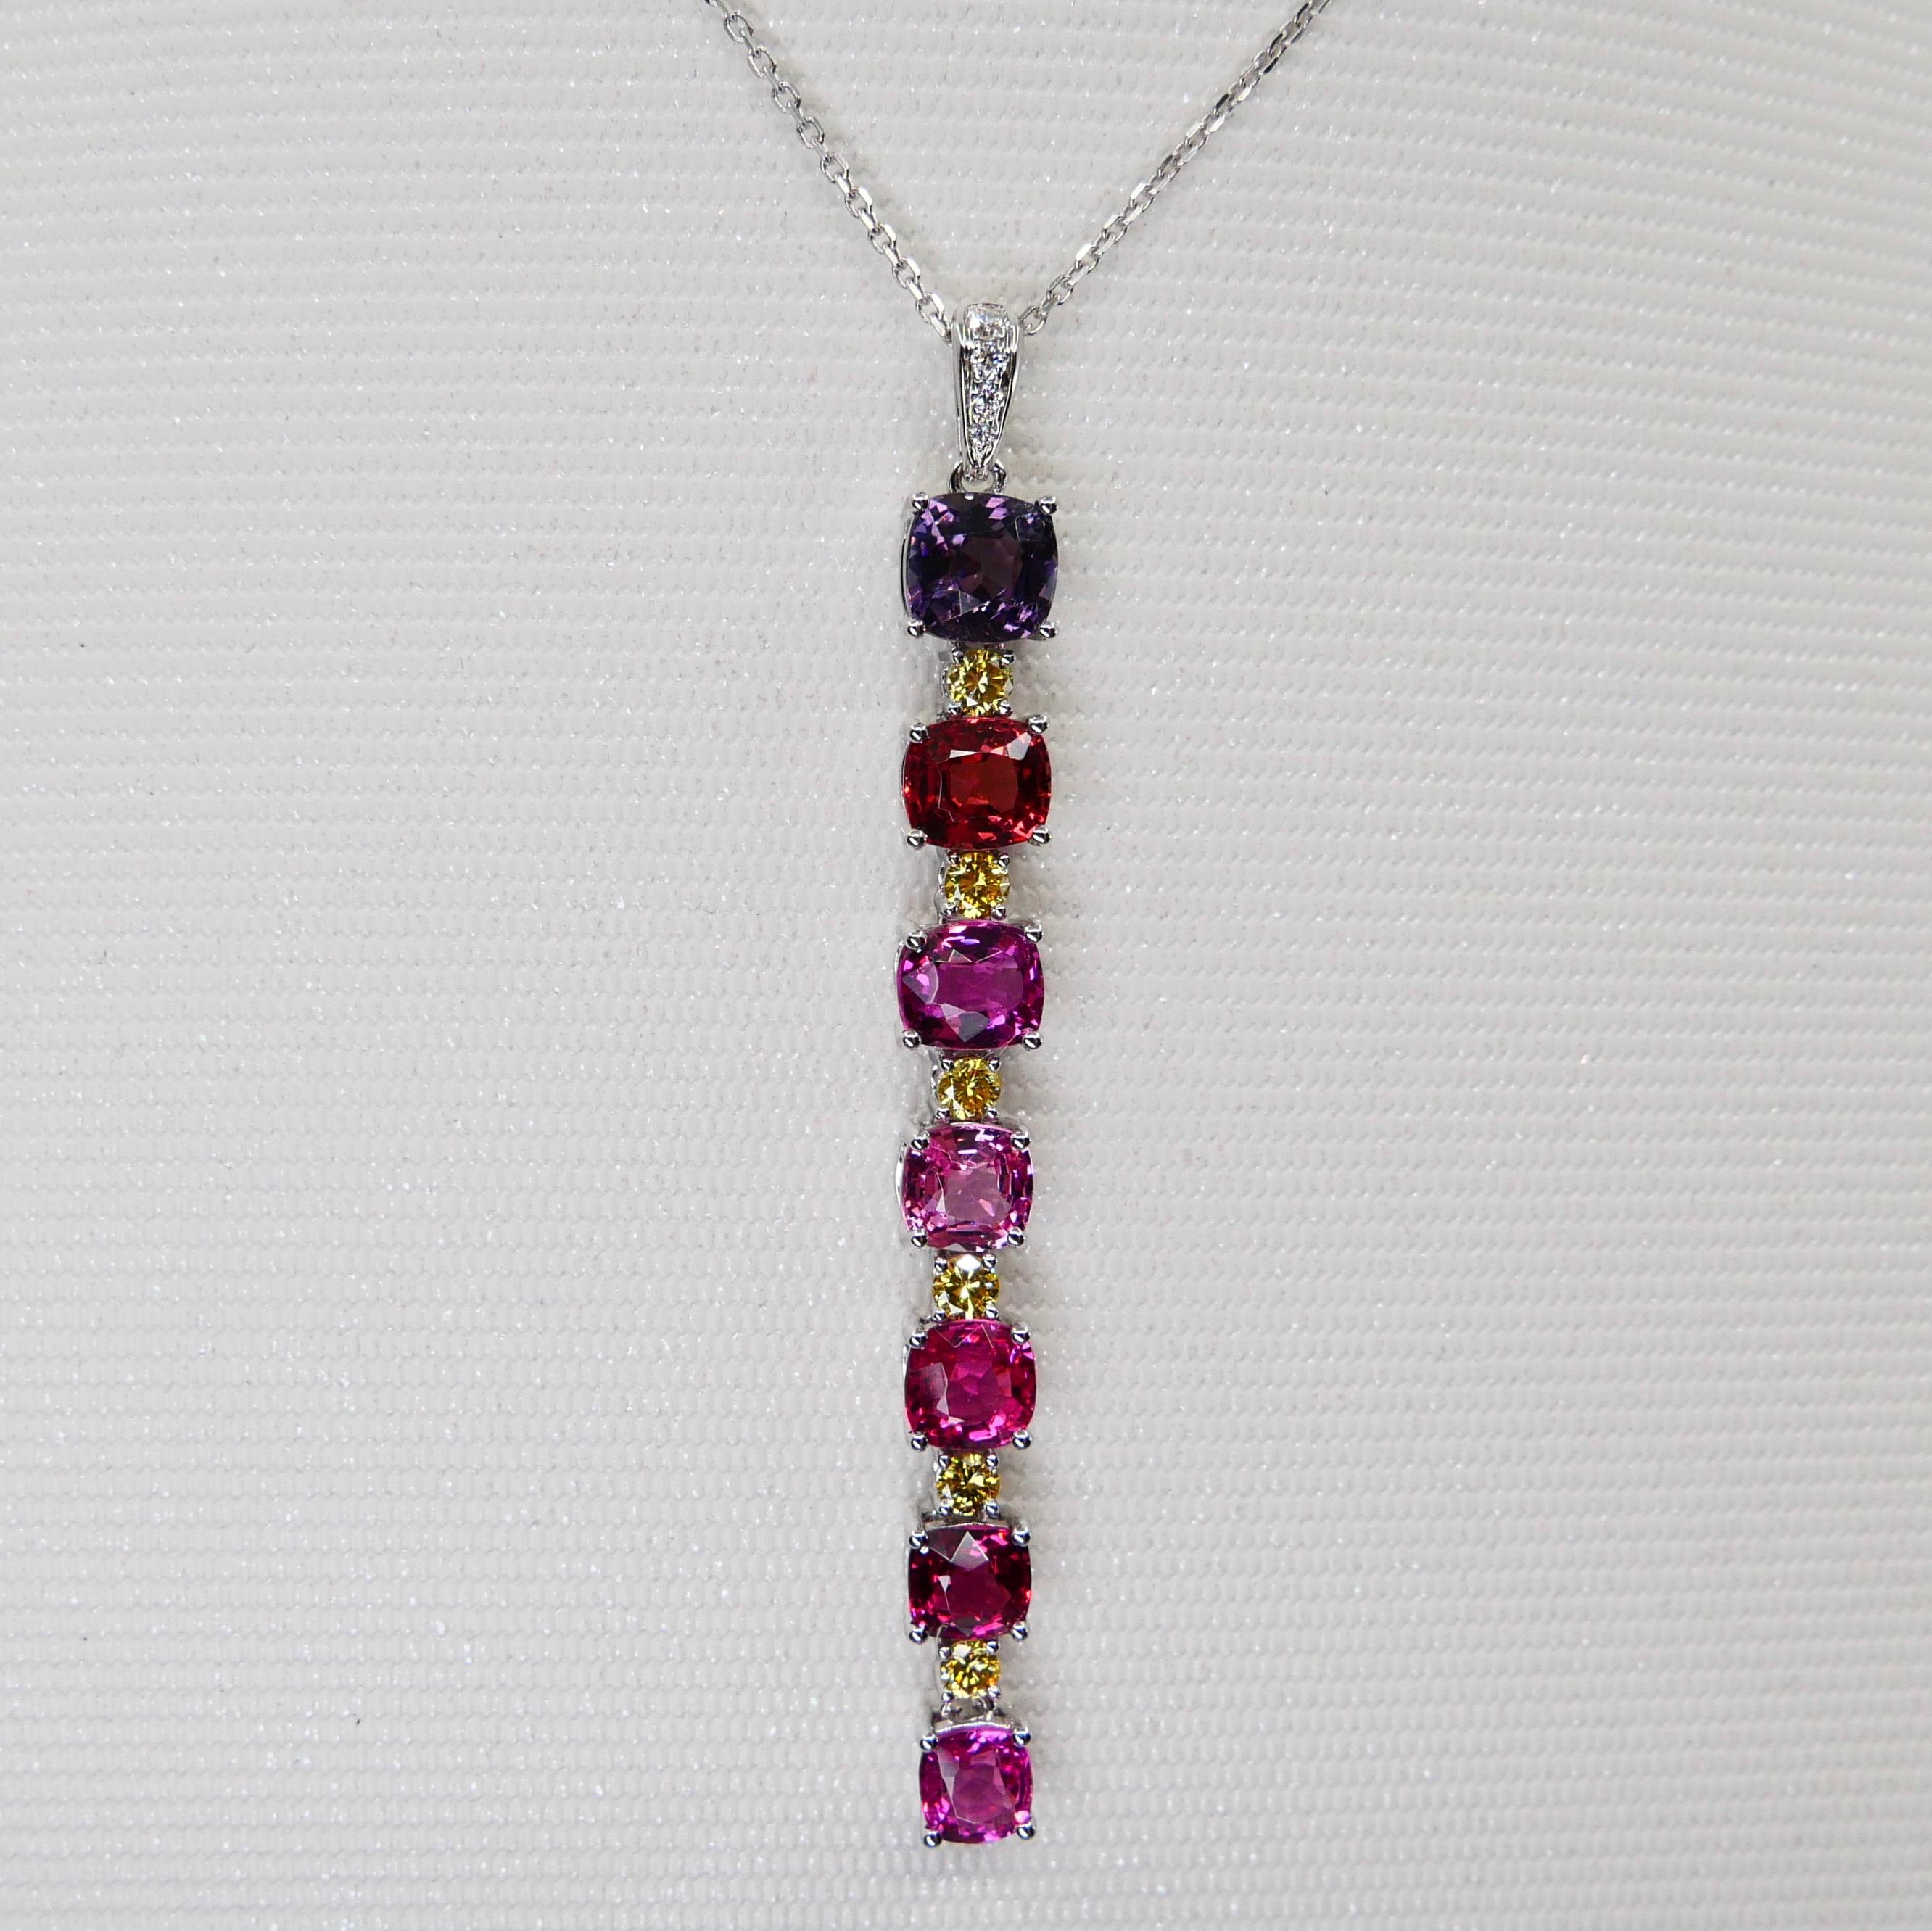 Vivid Colored Spinels, White & Fancy Yellow Diamond Pendant Drop Necklace, Glows For Sale 3